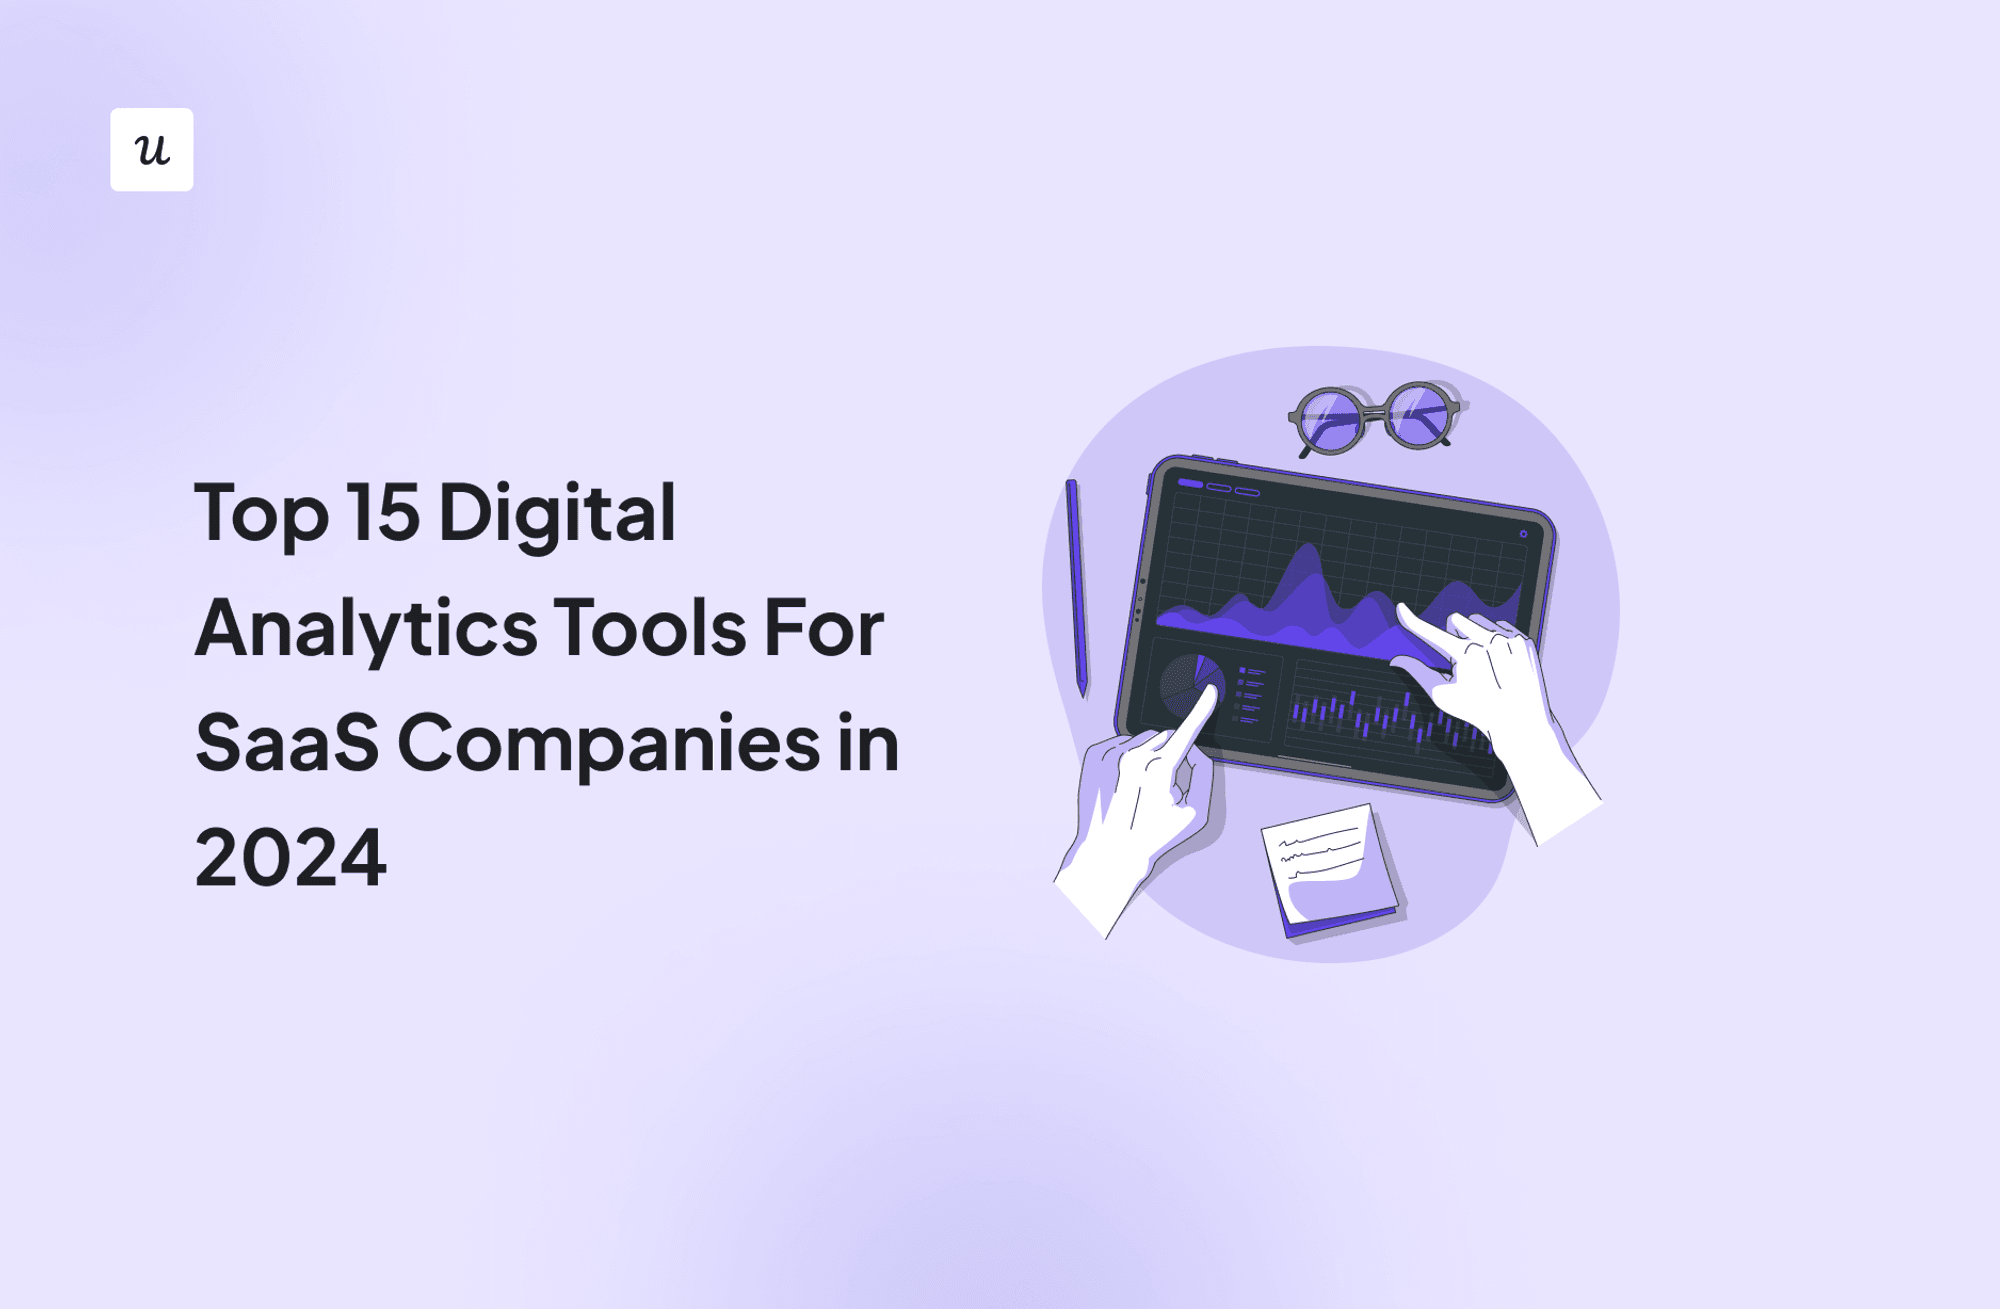 Top 15 Digital Analytics Tools For SaaS Companies in 2024 cover